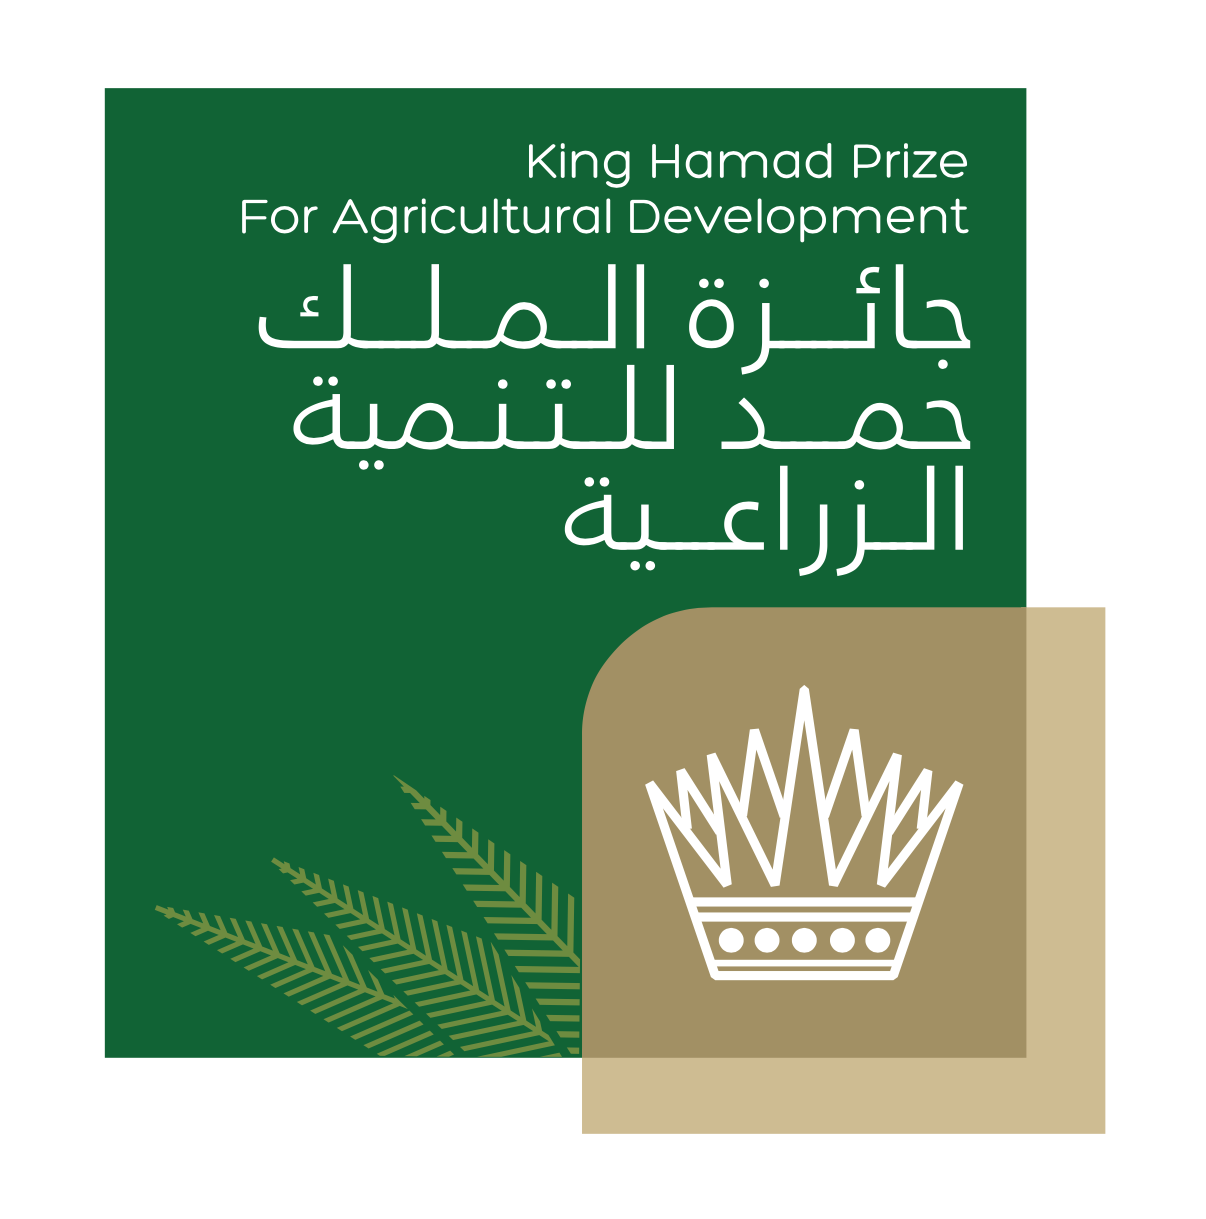 King Hamad Agricultural Prize